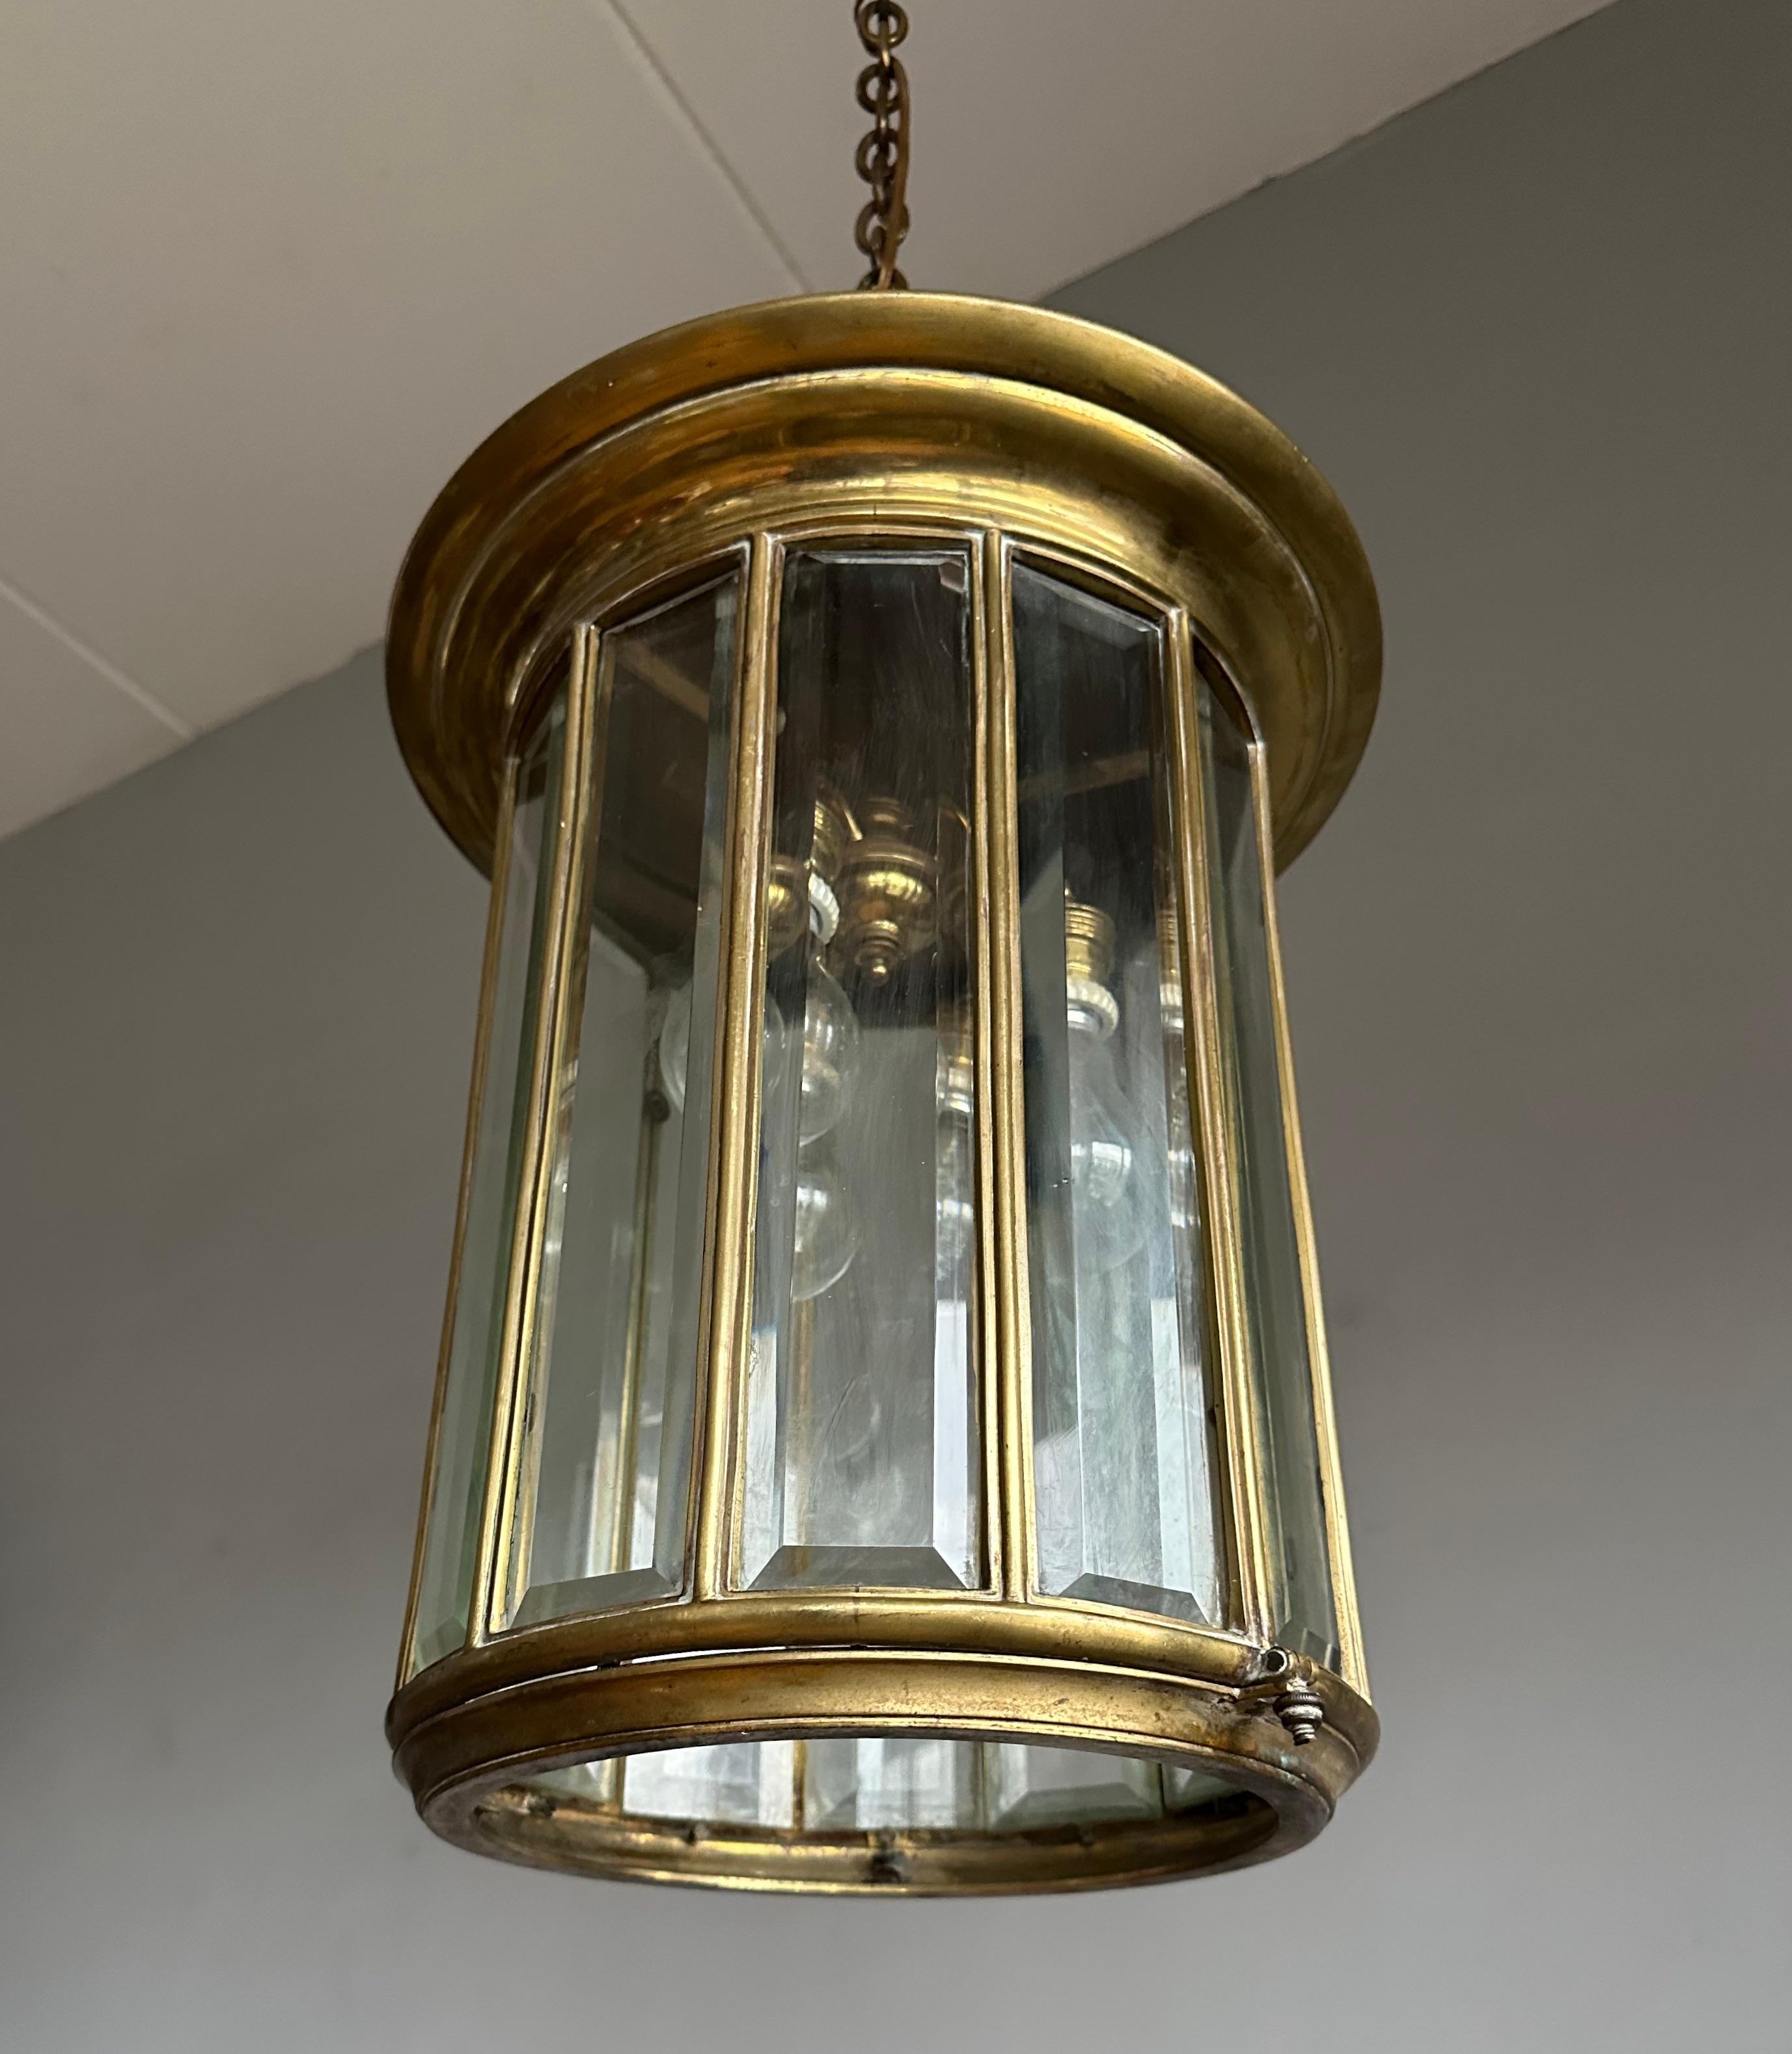 Large and all handcrafted Art Deco pendant with 12 thick transparent beveled glass window panels and dome top. 

If you live in an early 1900s Arts and Crafts home or if you are a collector of unique and stylish home accessories from that era then